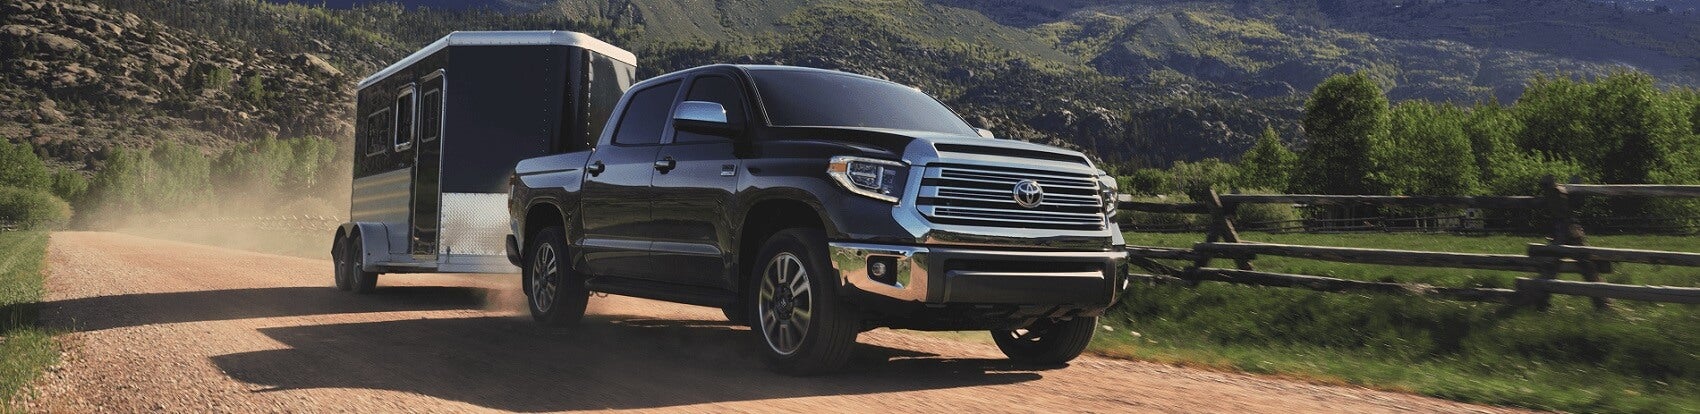 Toyota Tundra Towing Power